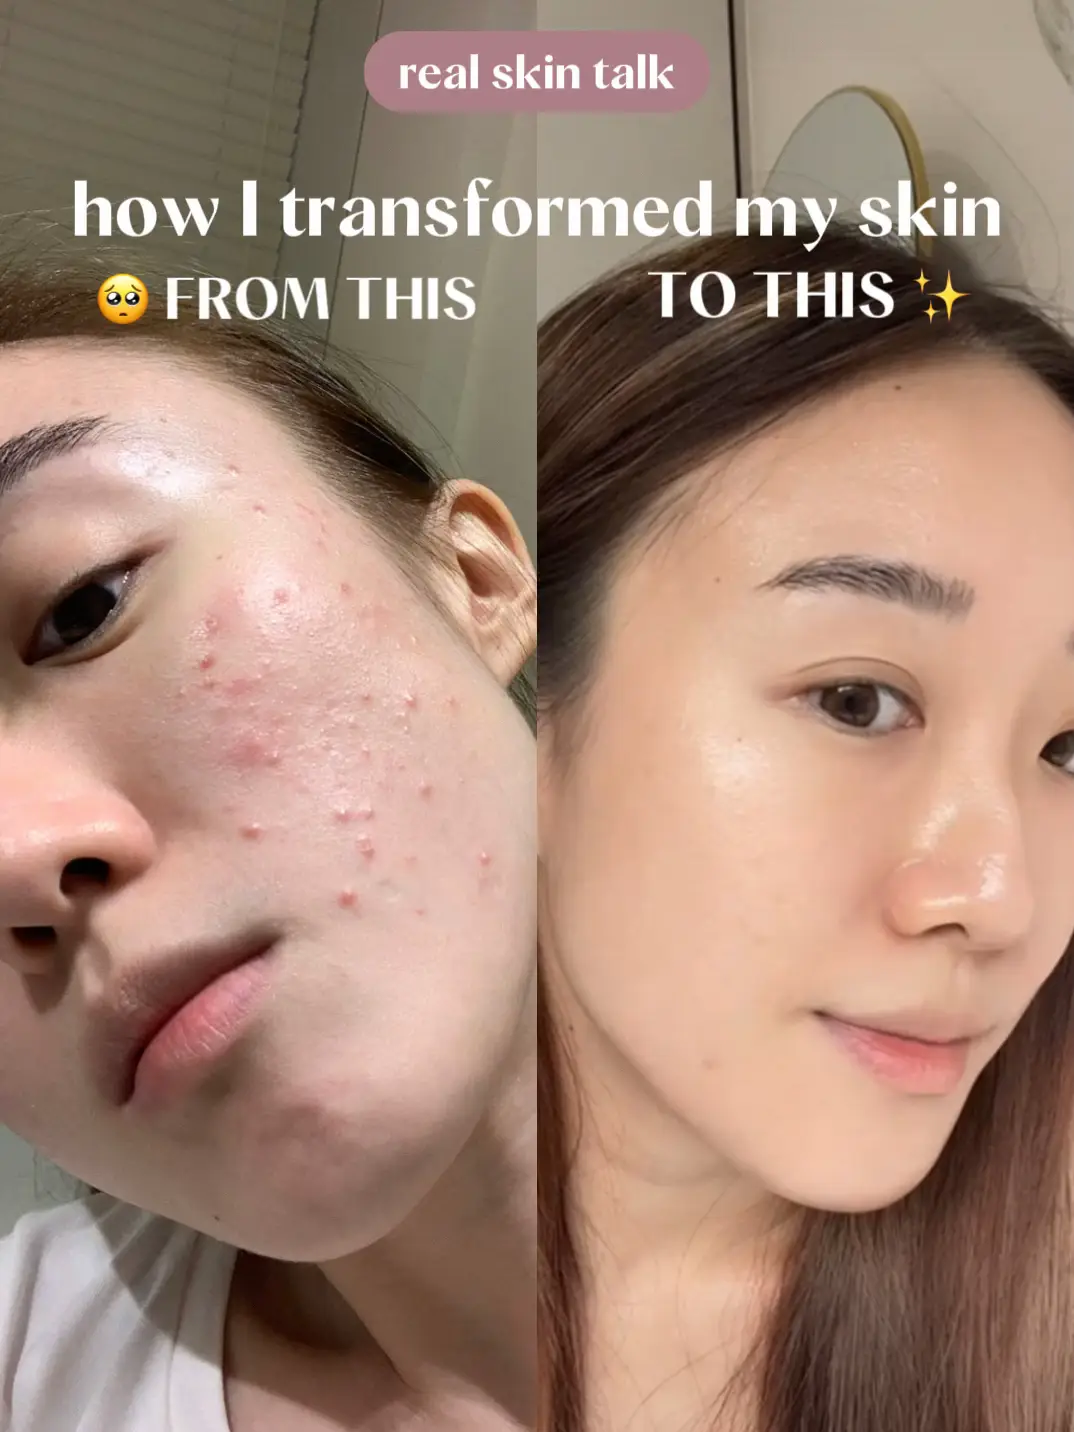 Acne tips and products that changed my life 😭's images(0)